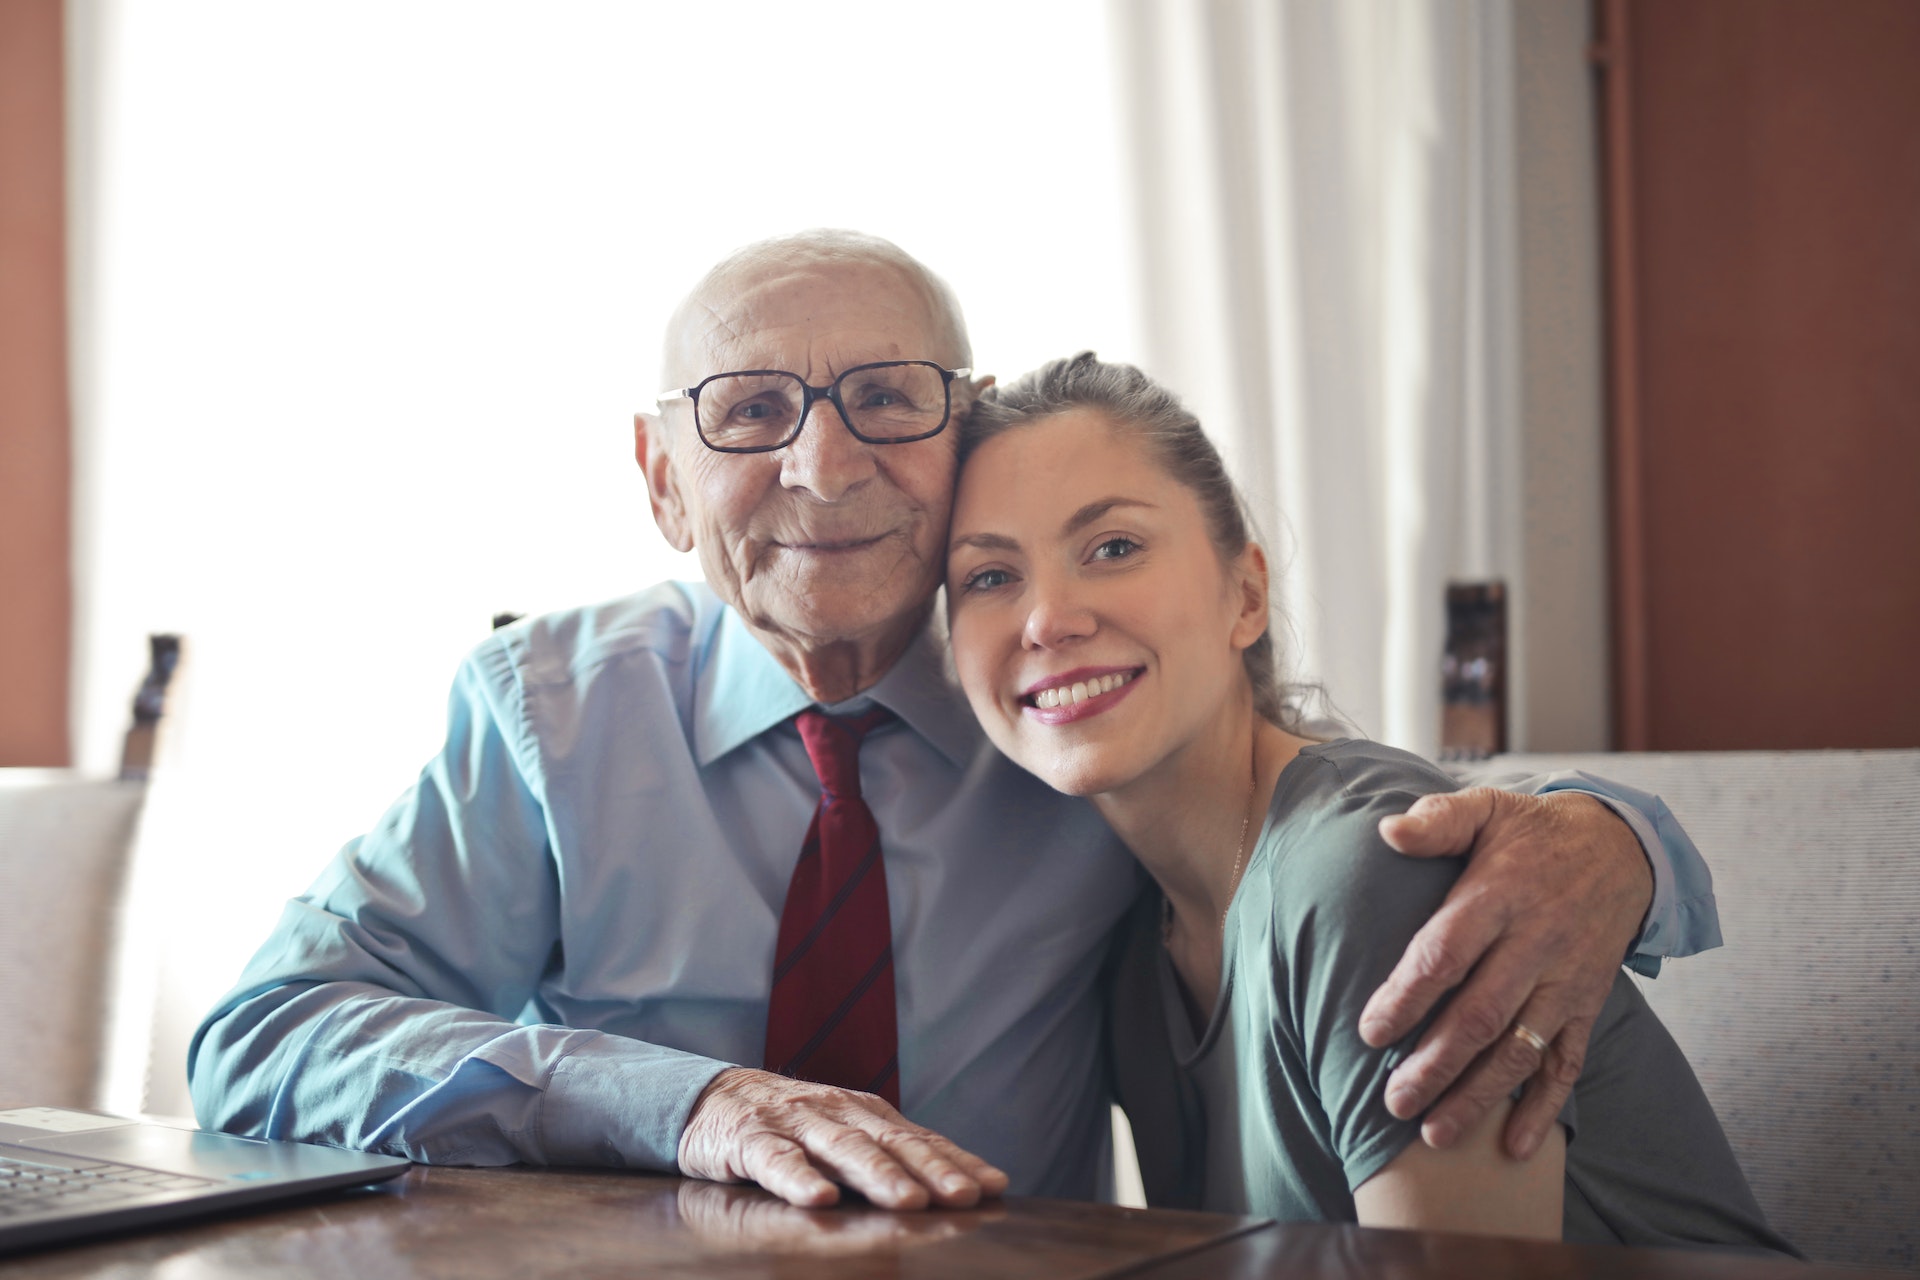 A young girl smiles while embracing her elderly grandfather | Source: Pexels